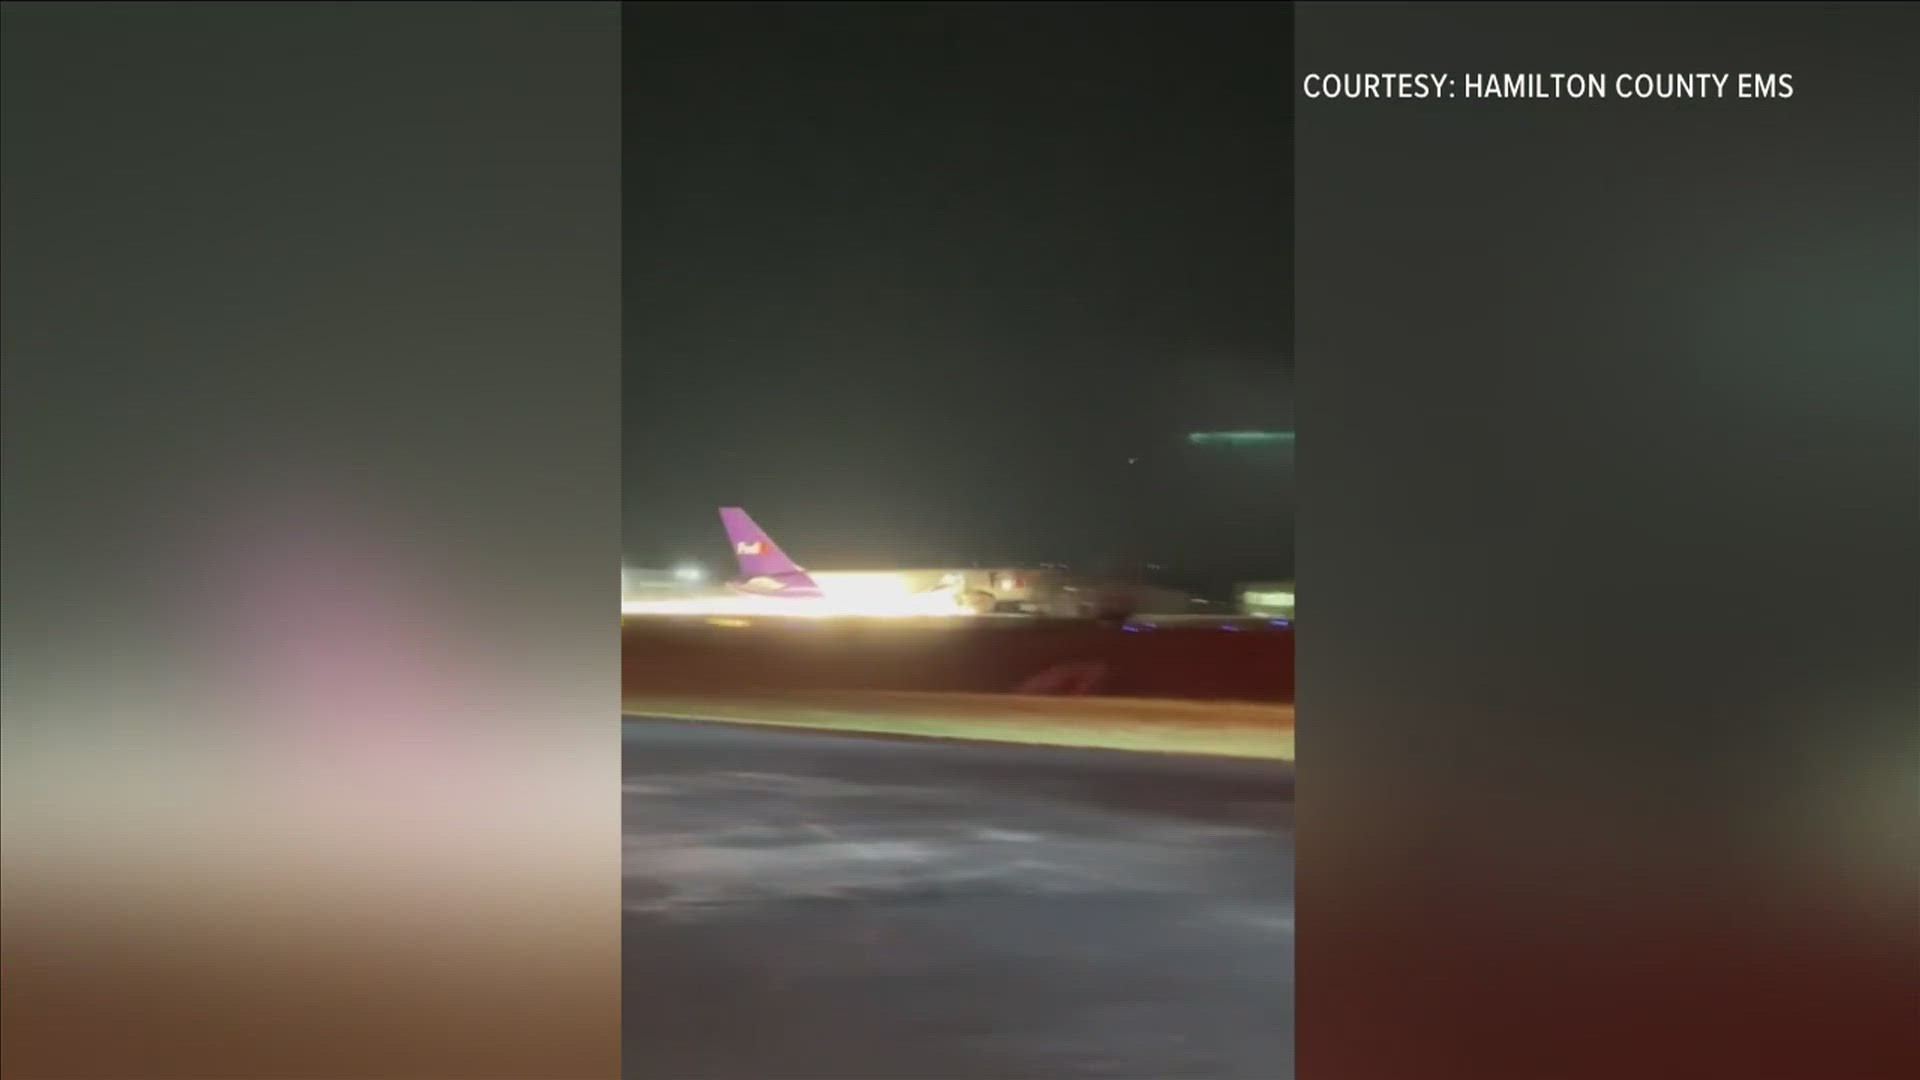 The National Transportation Safety Board (NTSB) is investigating after the plane's landing gear failed Wednesday night.